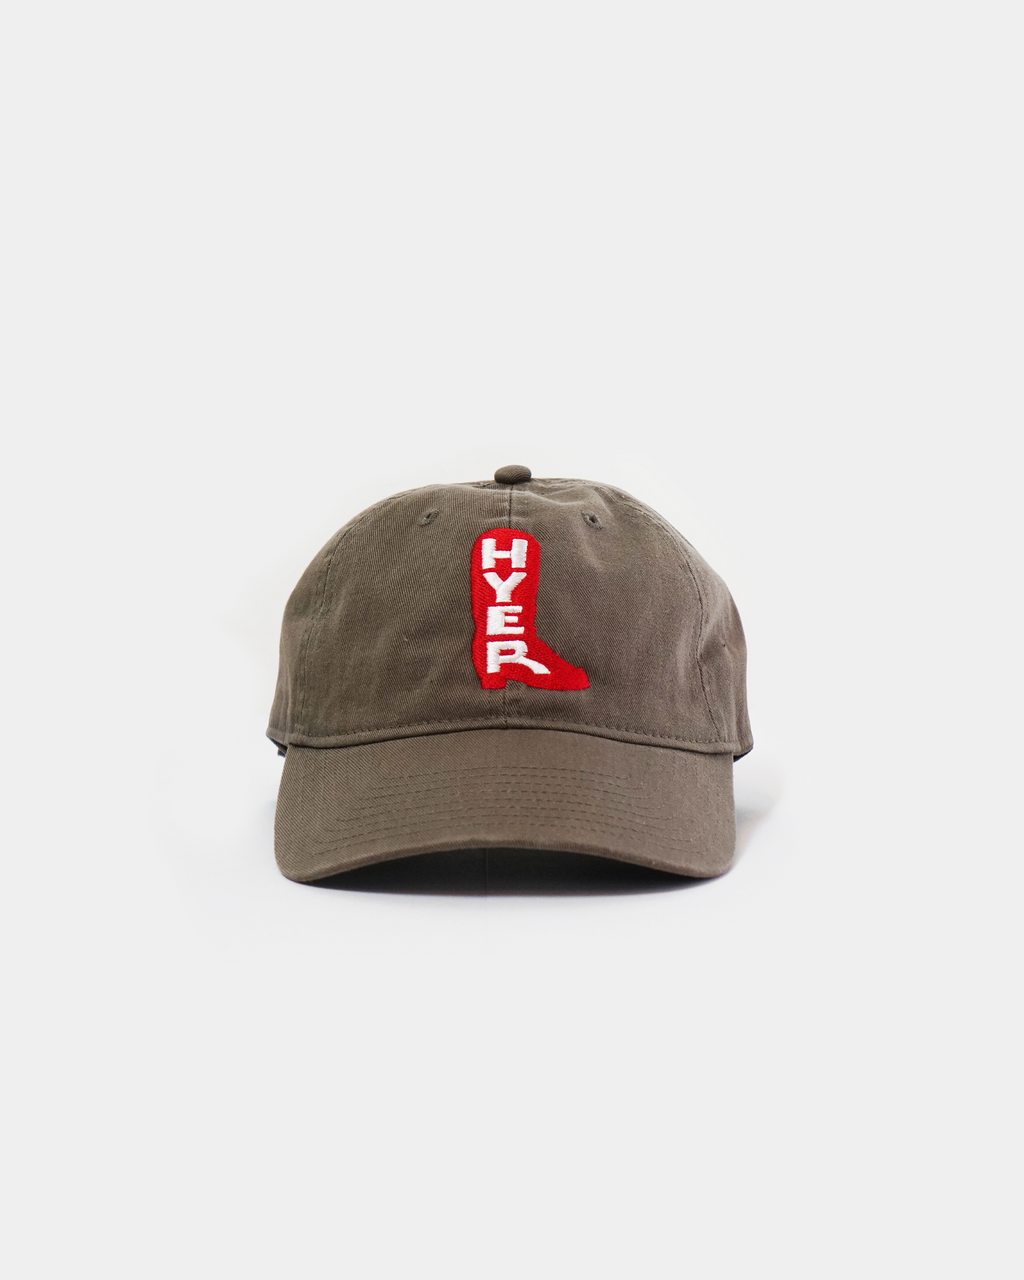 Hyer Boot 6-Panel Hat – HYER Boots